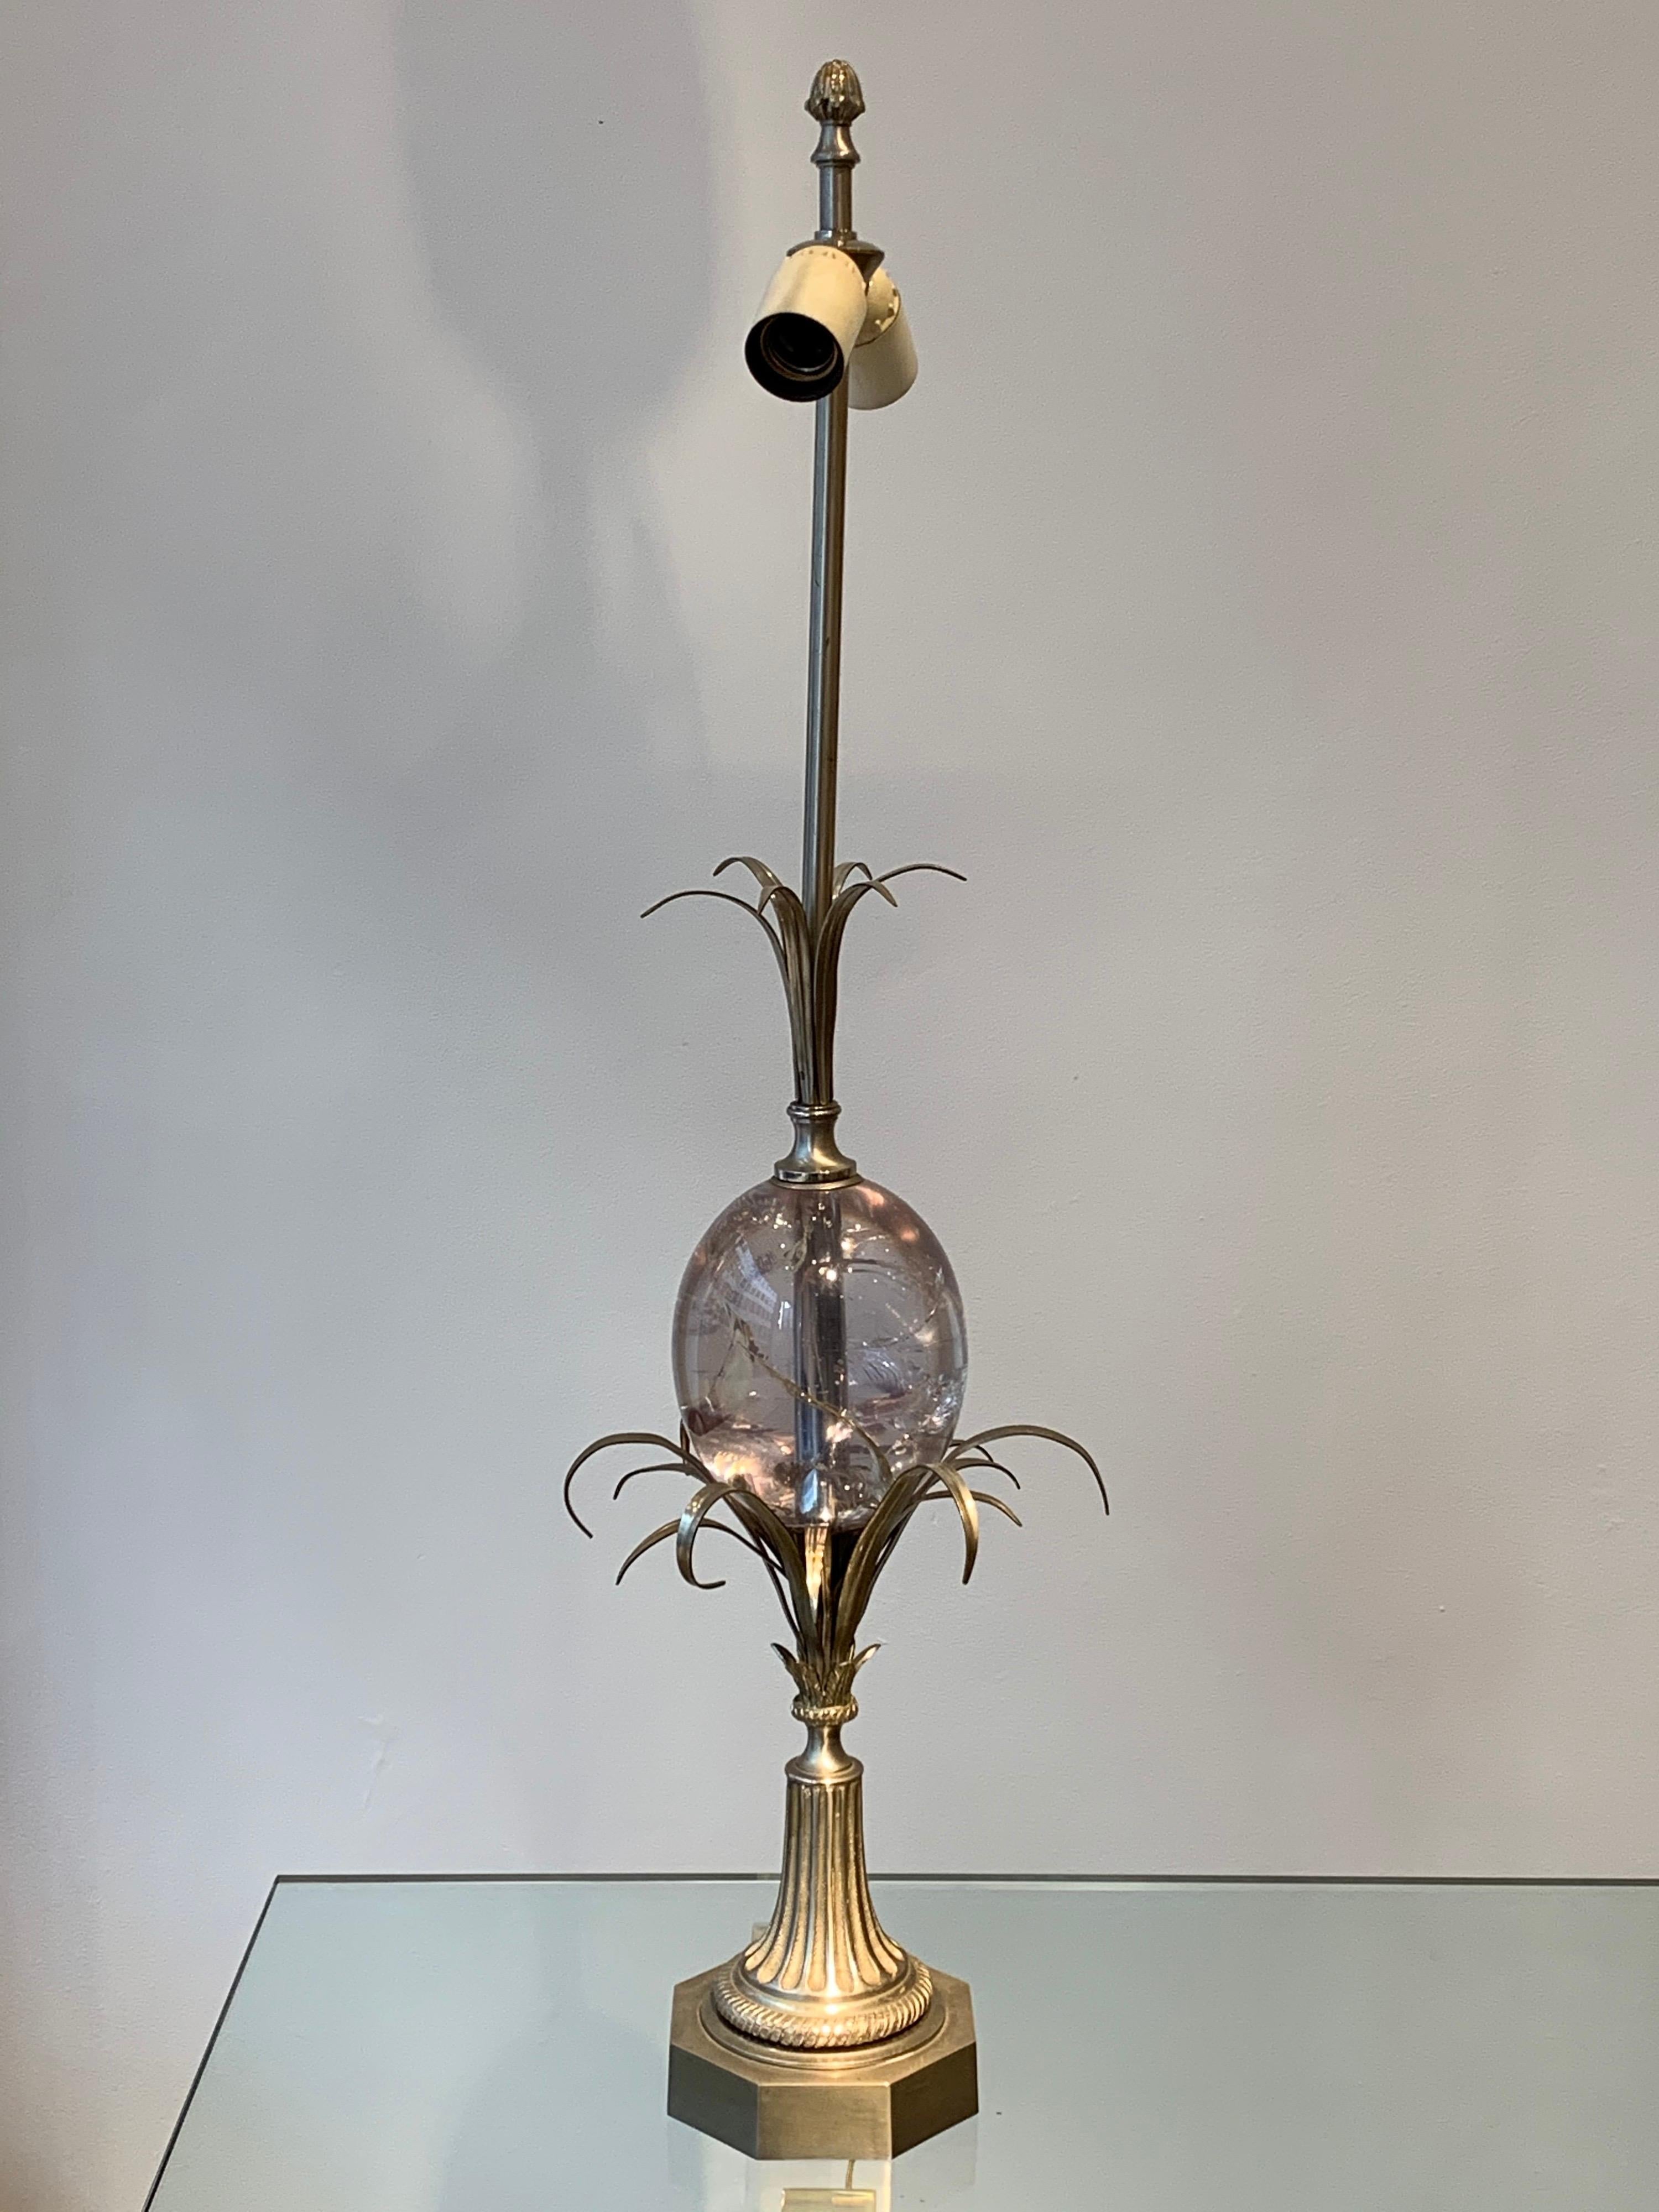 Maison Charles Silvered Bronze Lamp with Fractal Resin, circa 1960s-1970s 7